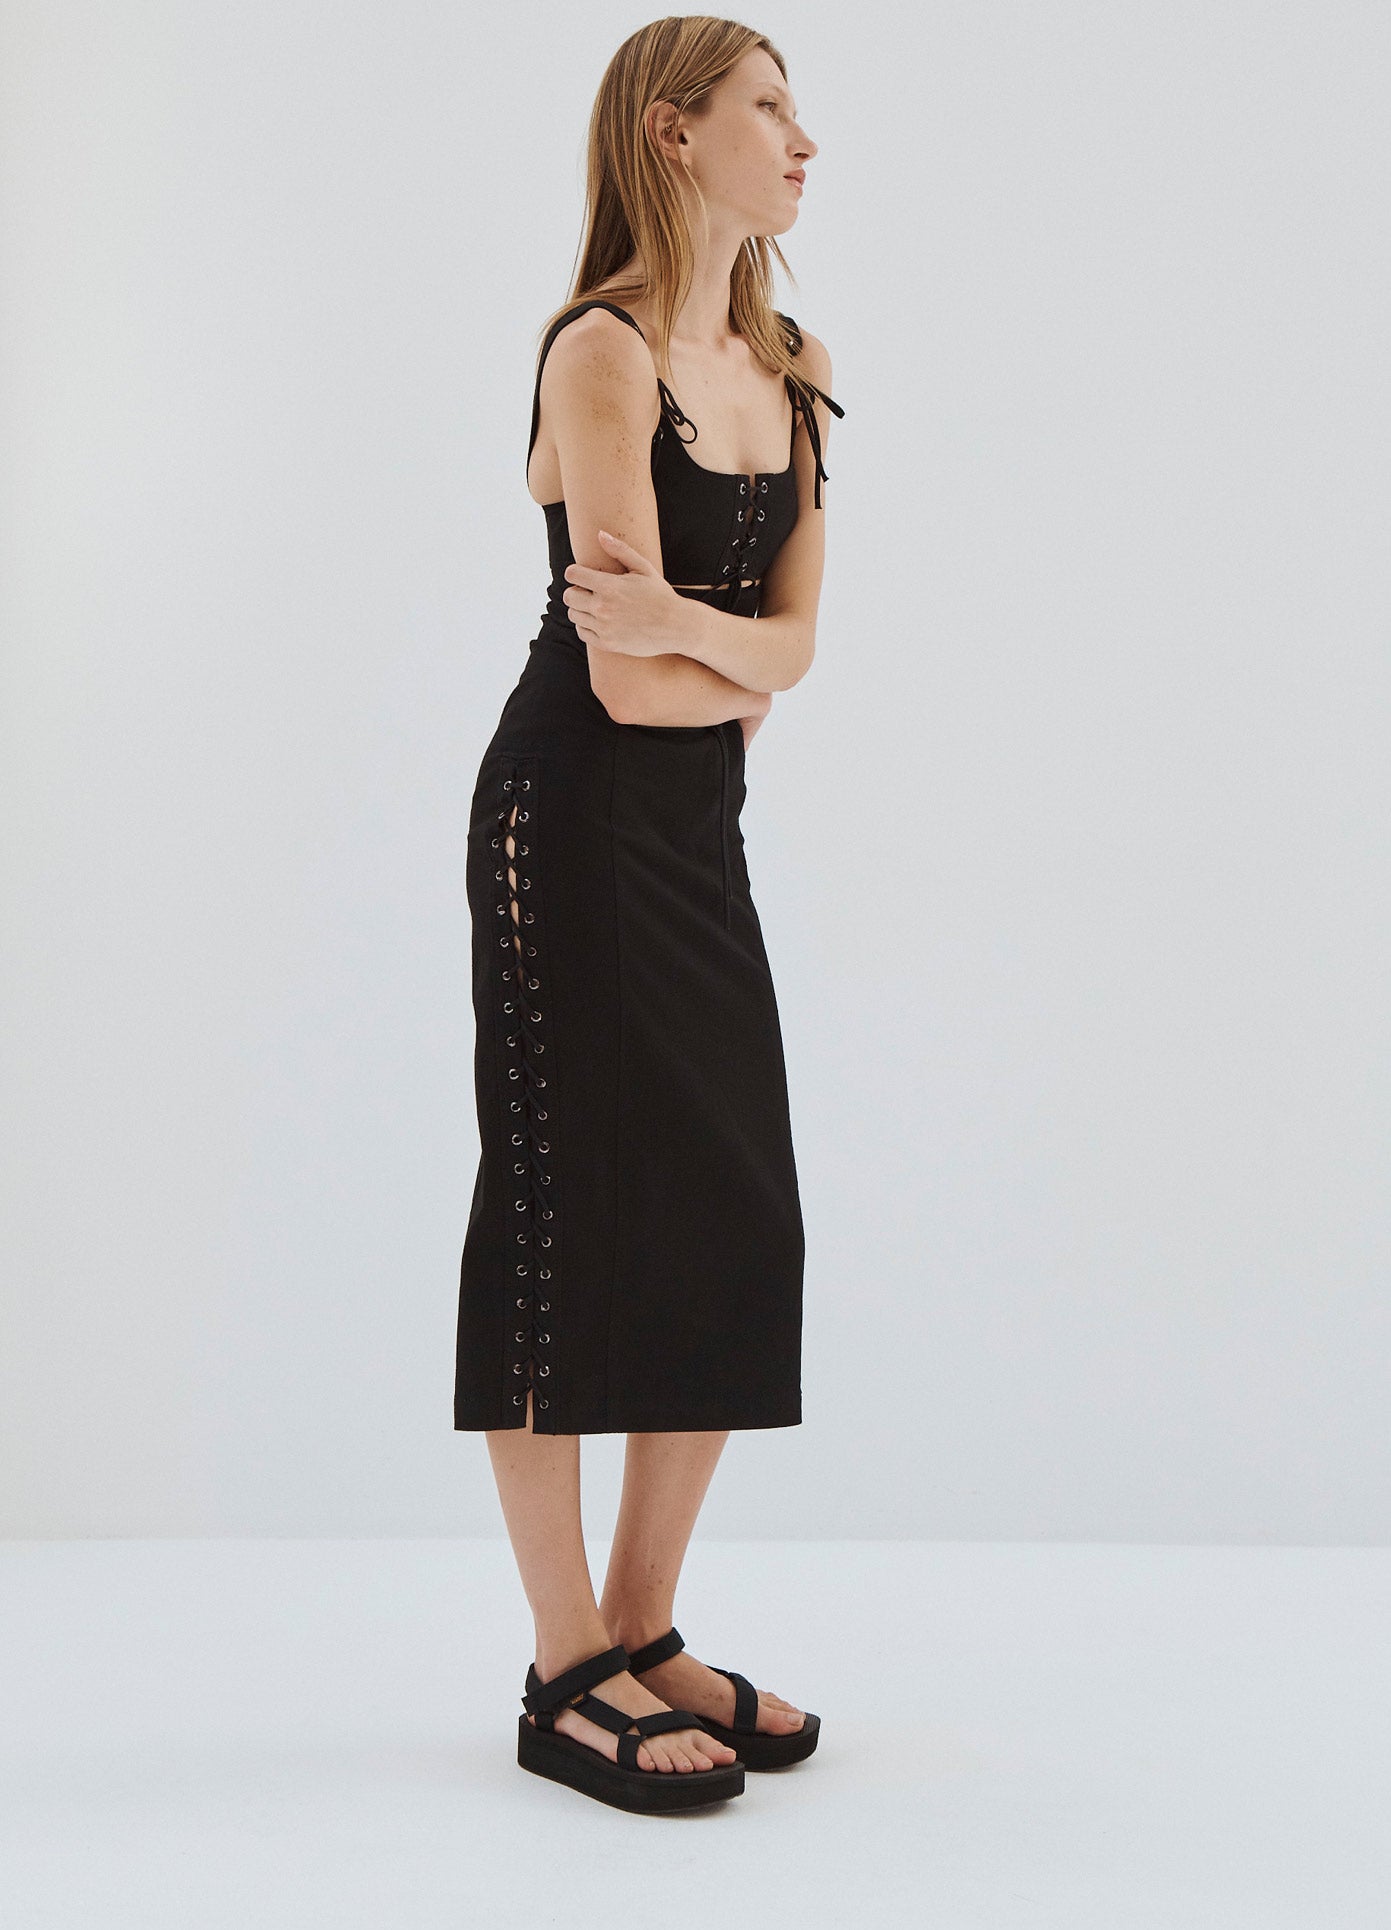 MONSE Laced Detail Dress in Black on Model Side View